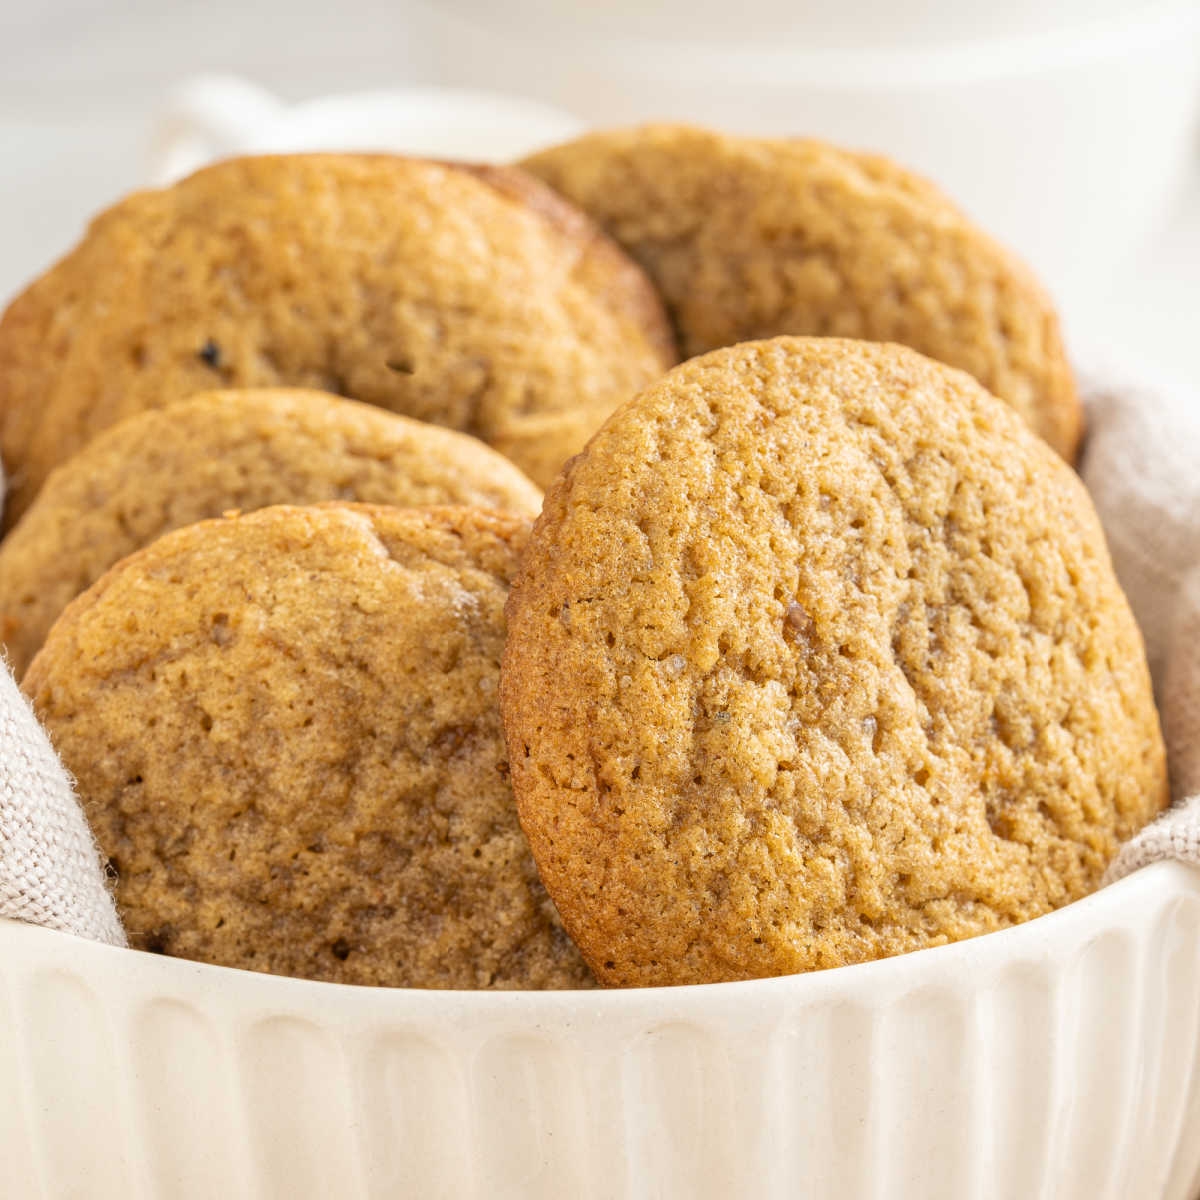 Close up of a white bowl filled with large tan chai spiced cookies, showing their soft texture.